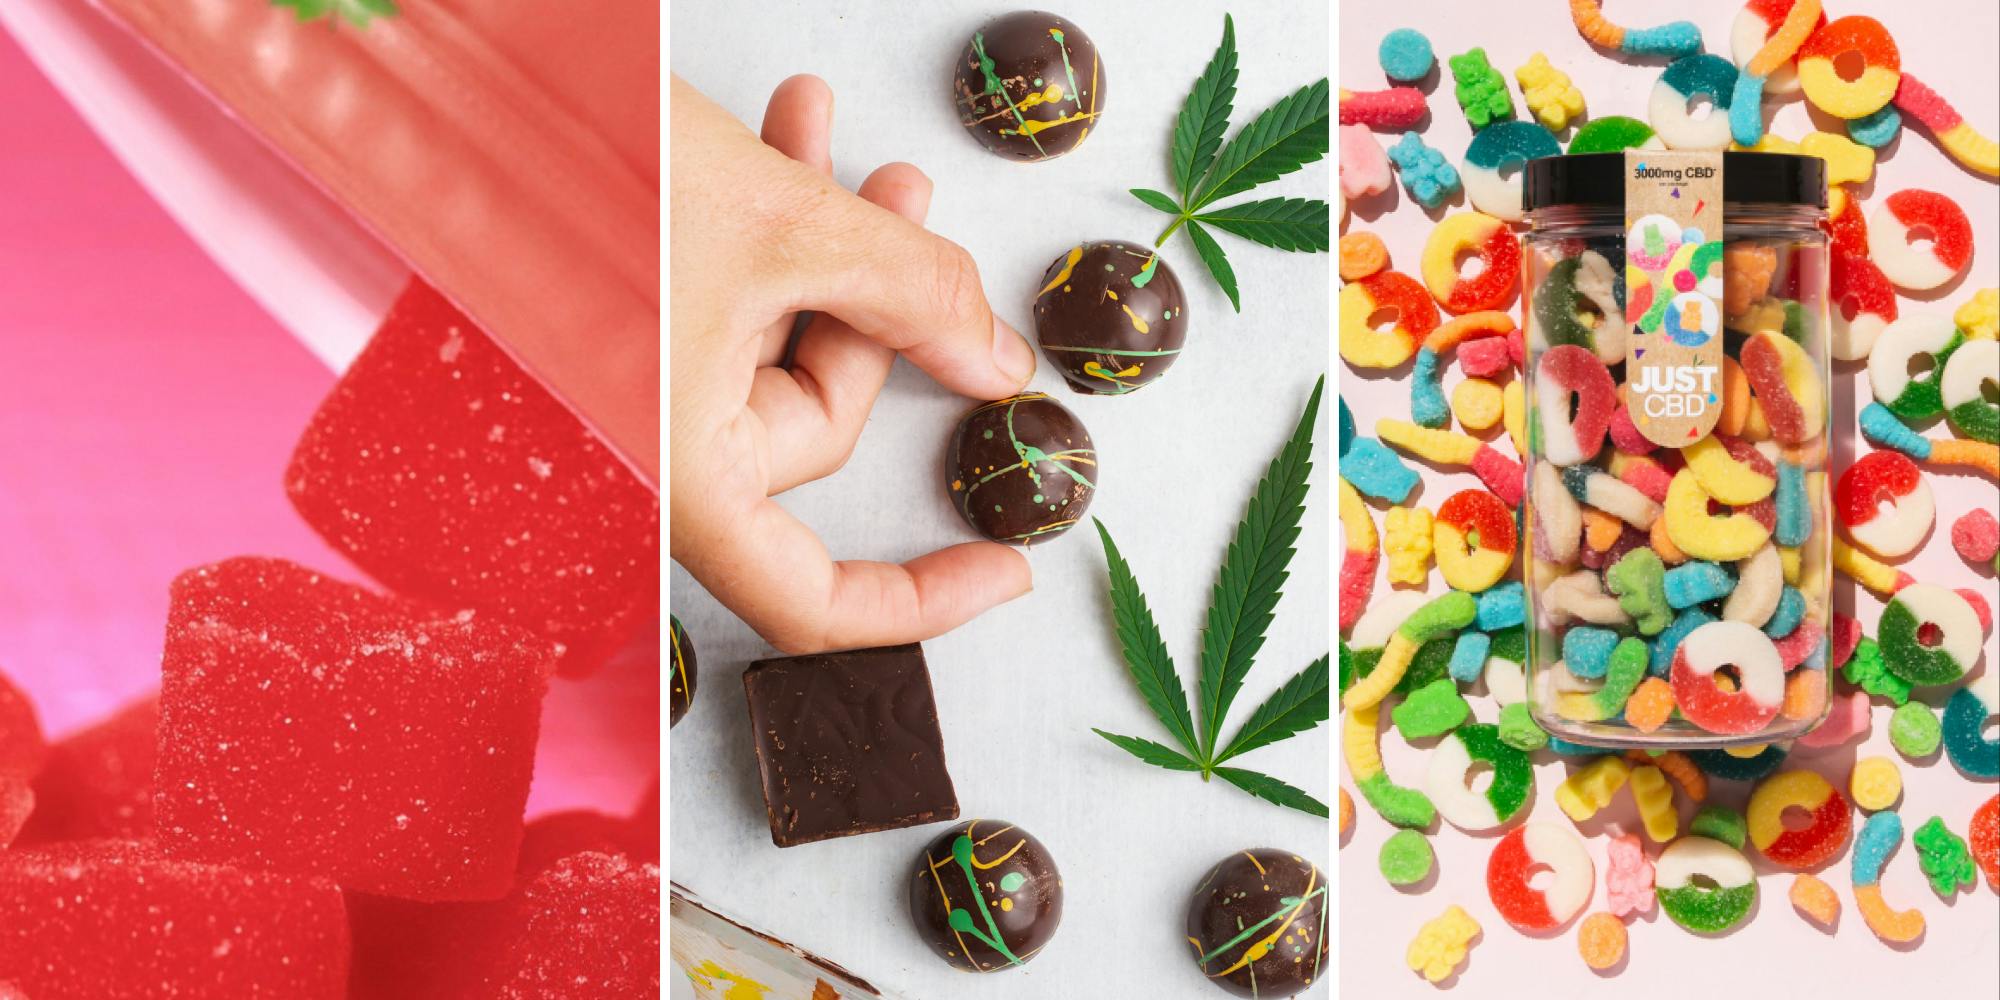 These are the best edibles for any situation